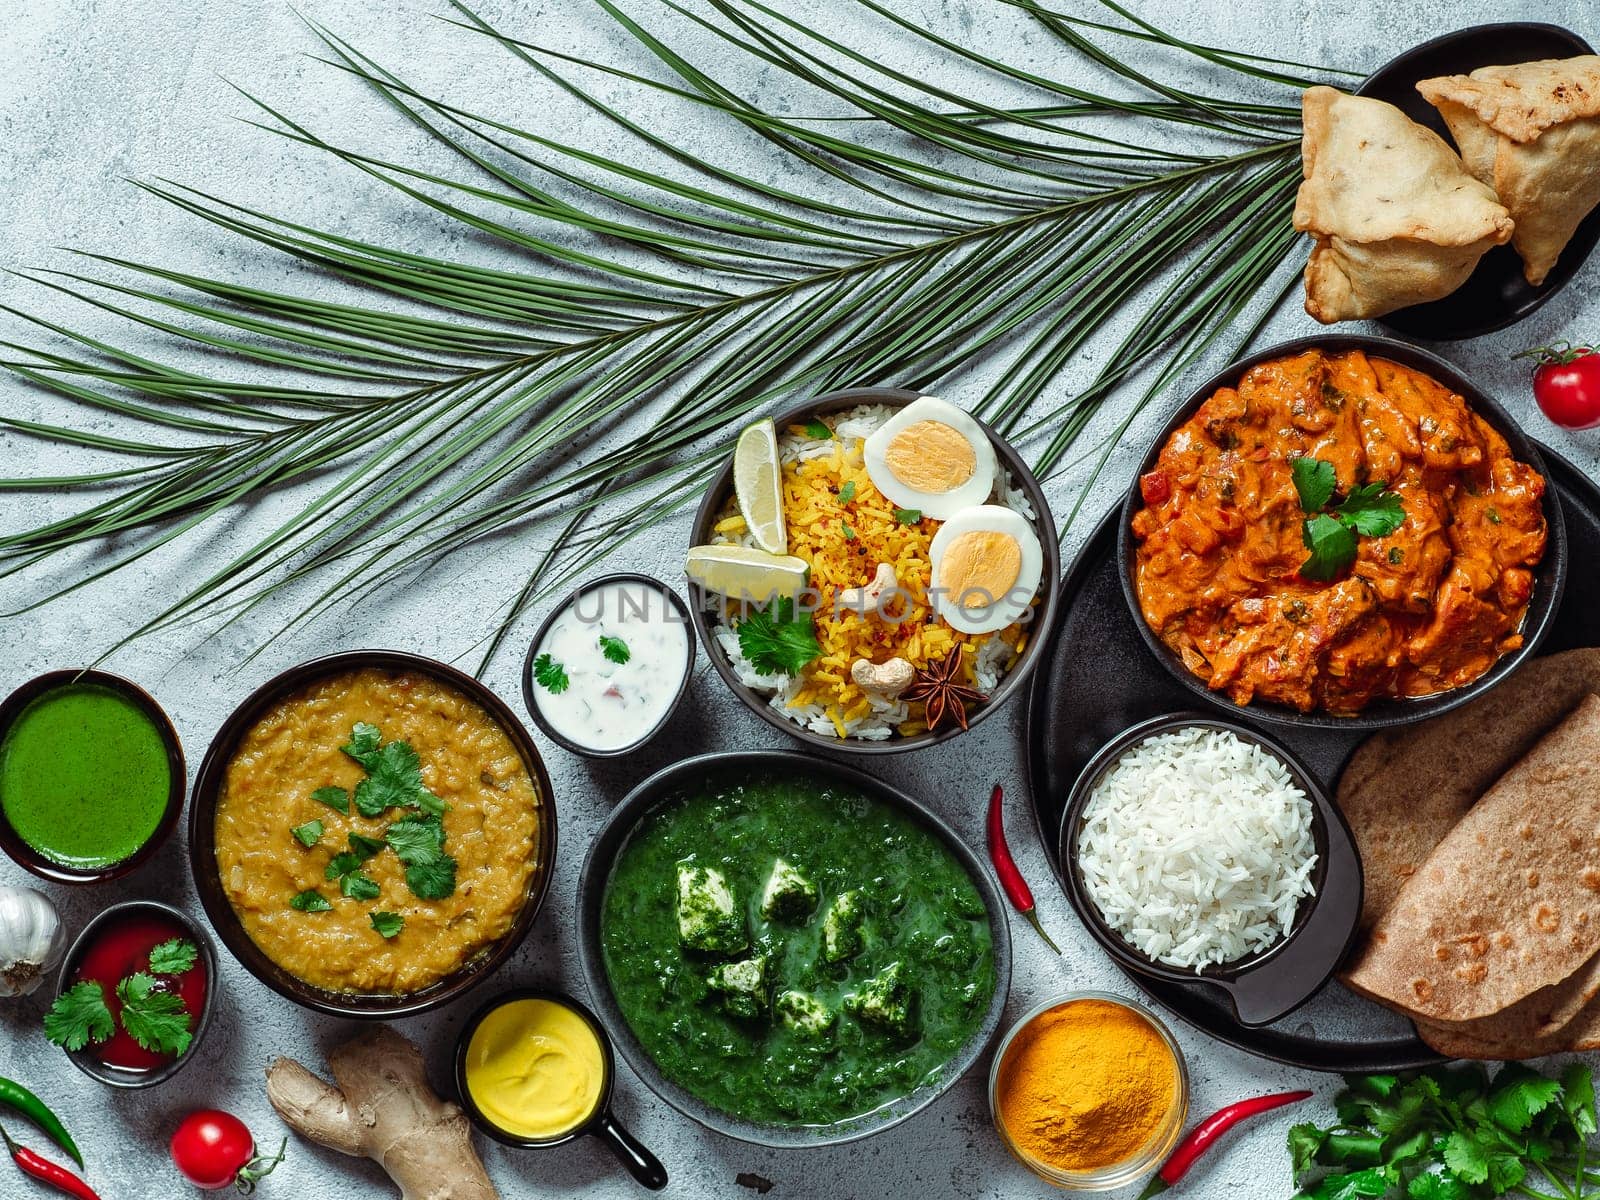 Indian cuisine dishes: tikka masala, dal, paneer, samosa, chapati, chutney, spices. Indian food on gray background. Assortment indian meal top view or flat lay. Copy space for text.